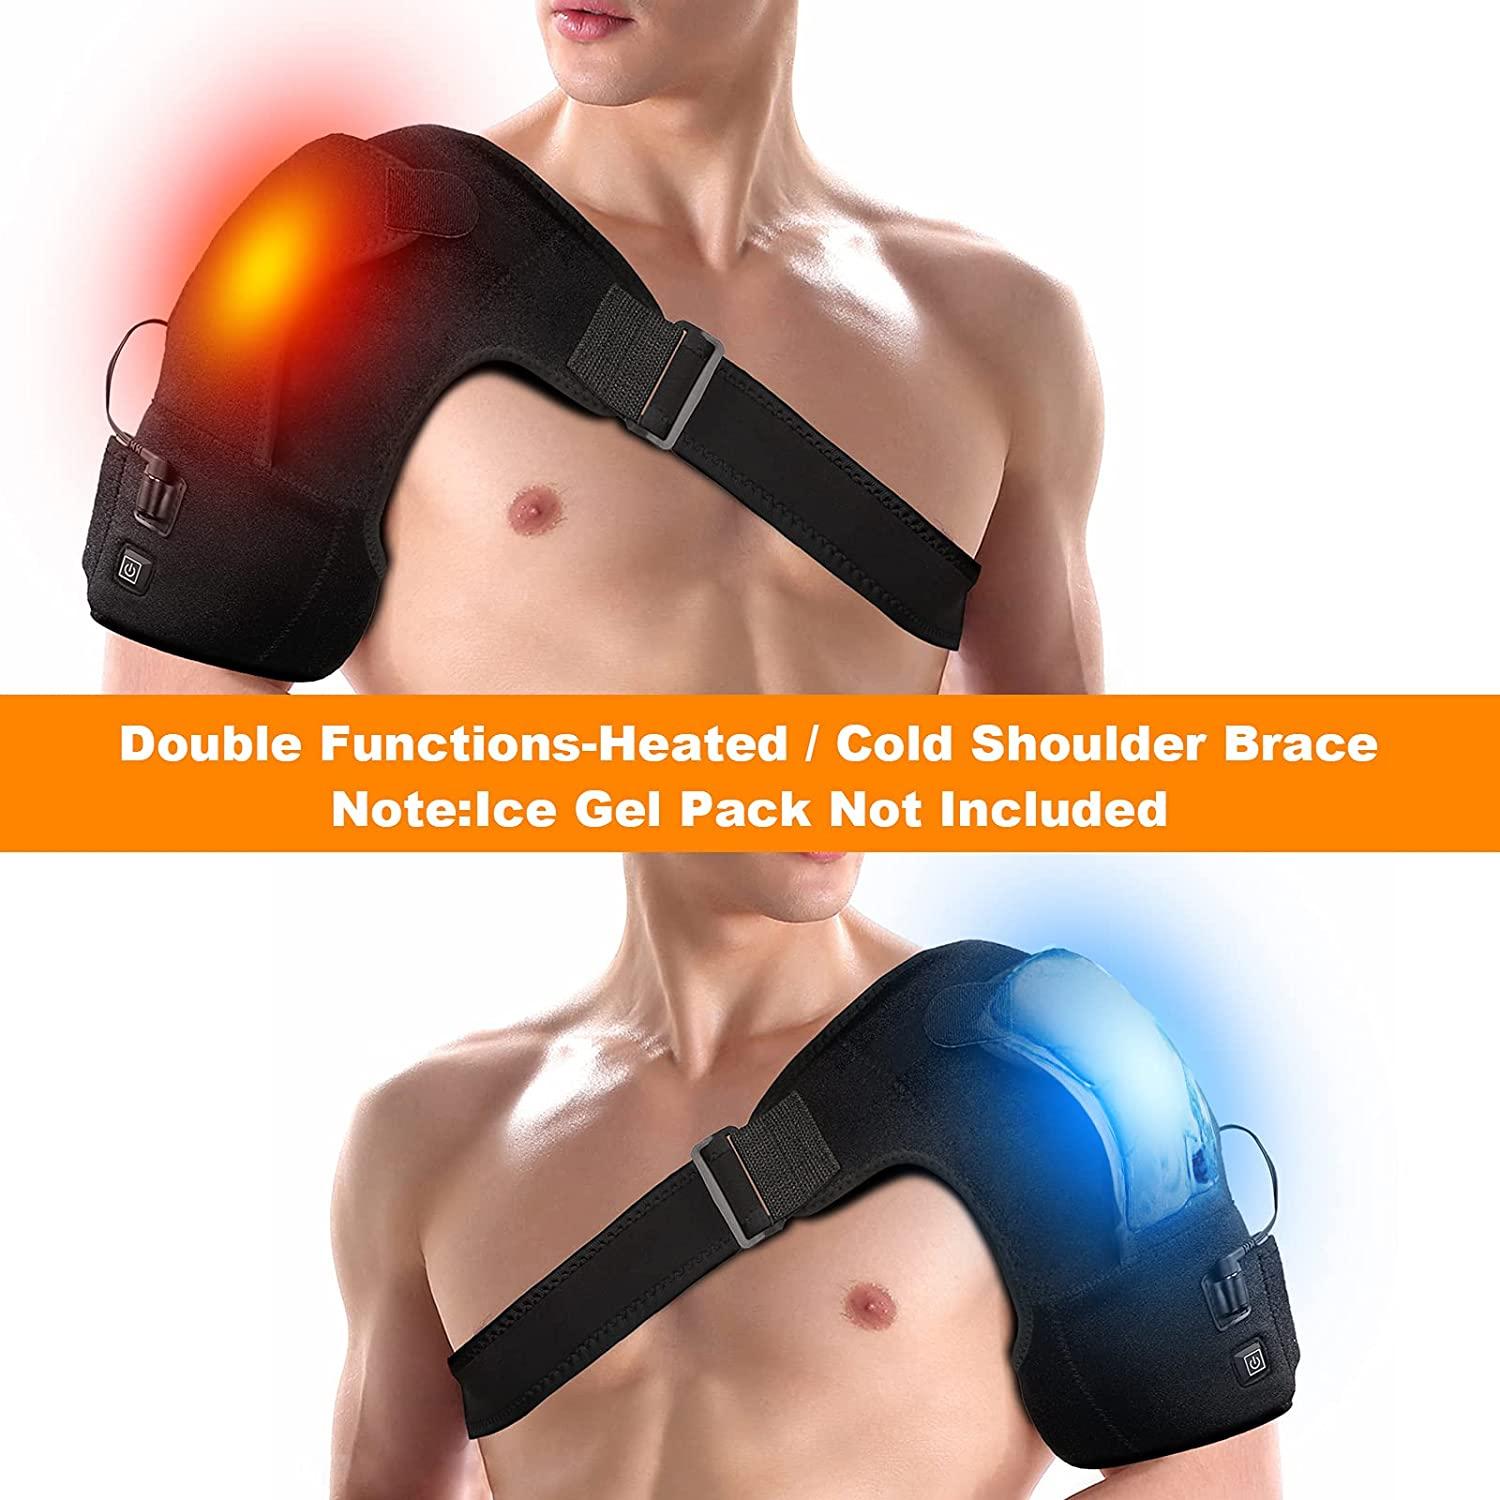 Double Shoulder Brace Thermal Self-Heating Shoulder Support Pain Relief  Compression Sleeve Wrap Breathable Neoprene Shoulder Pad Protector Rotator